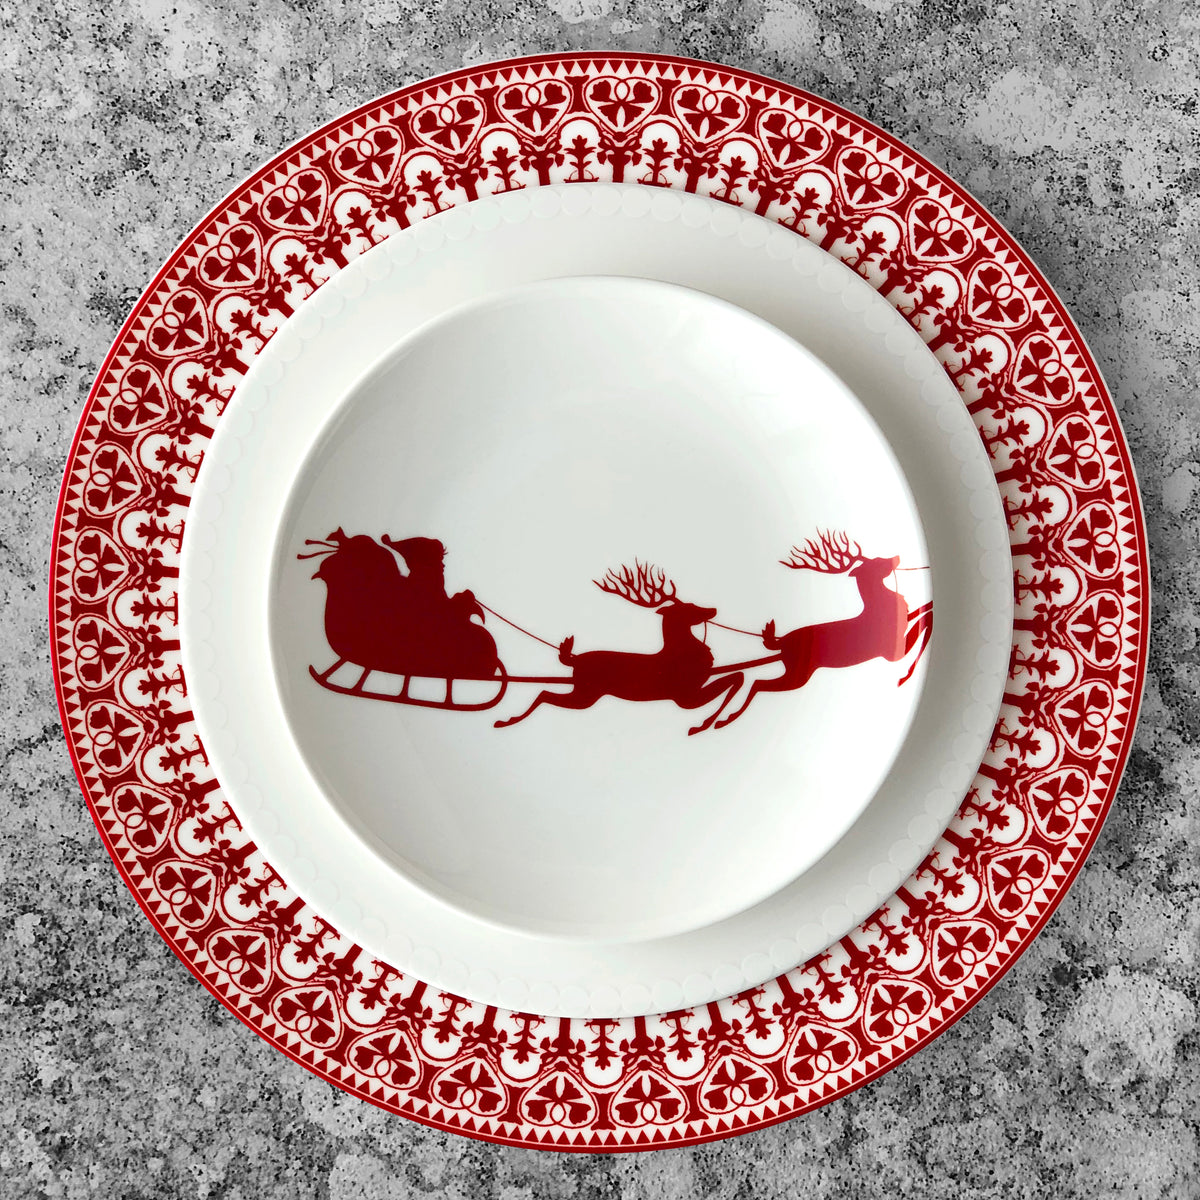 A white plate with red rim features a silhouette of Santa&#39;s sleigh pulled by two reindeer. The Sleigh Small Plates, part of heirloom-quality dinnerware by Caskata Artisanal Home, sit on a larger red and white decorative plate with a snowflake pattern on a gray background. These Christmas canapé plates come in boxed sets of 4.